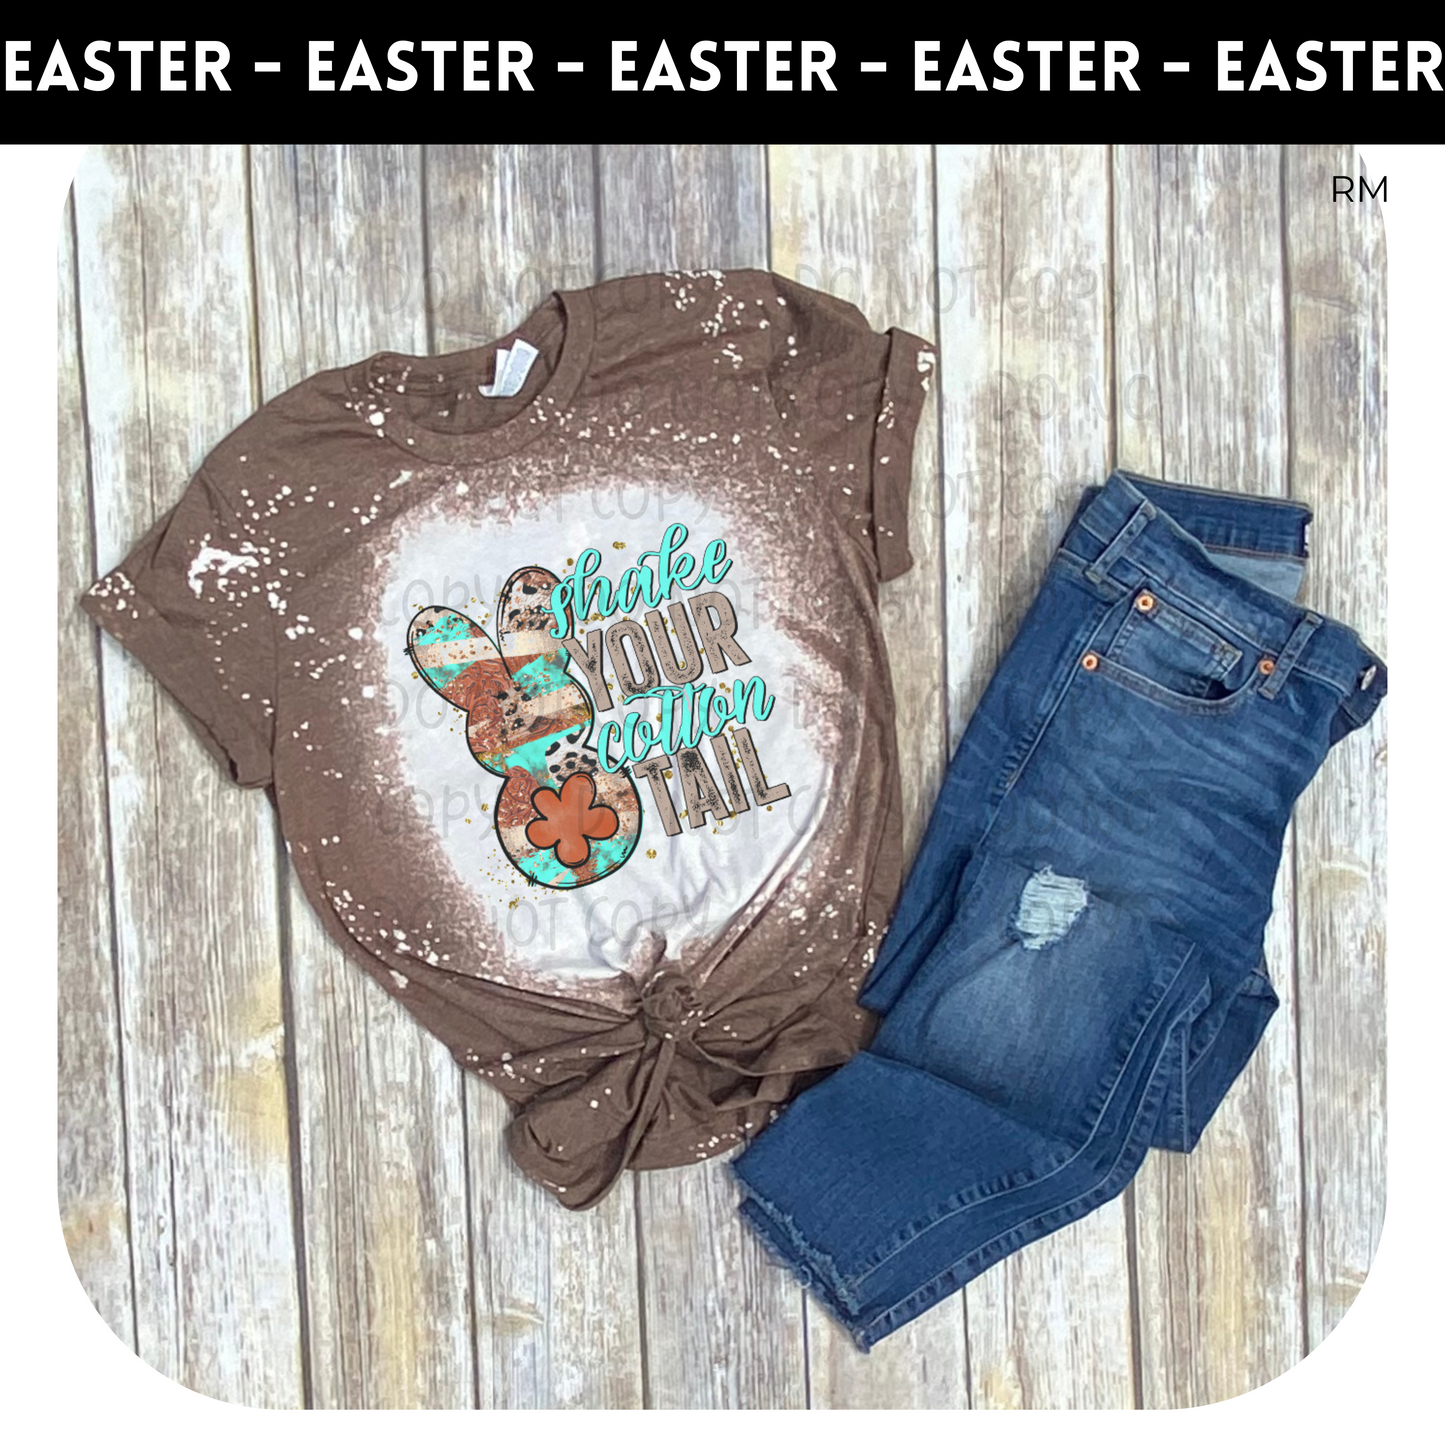 Shake Your Cotton Tail Adult Shirt- Easter 193